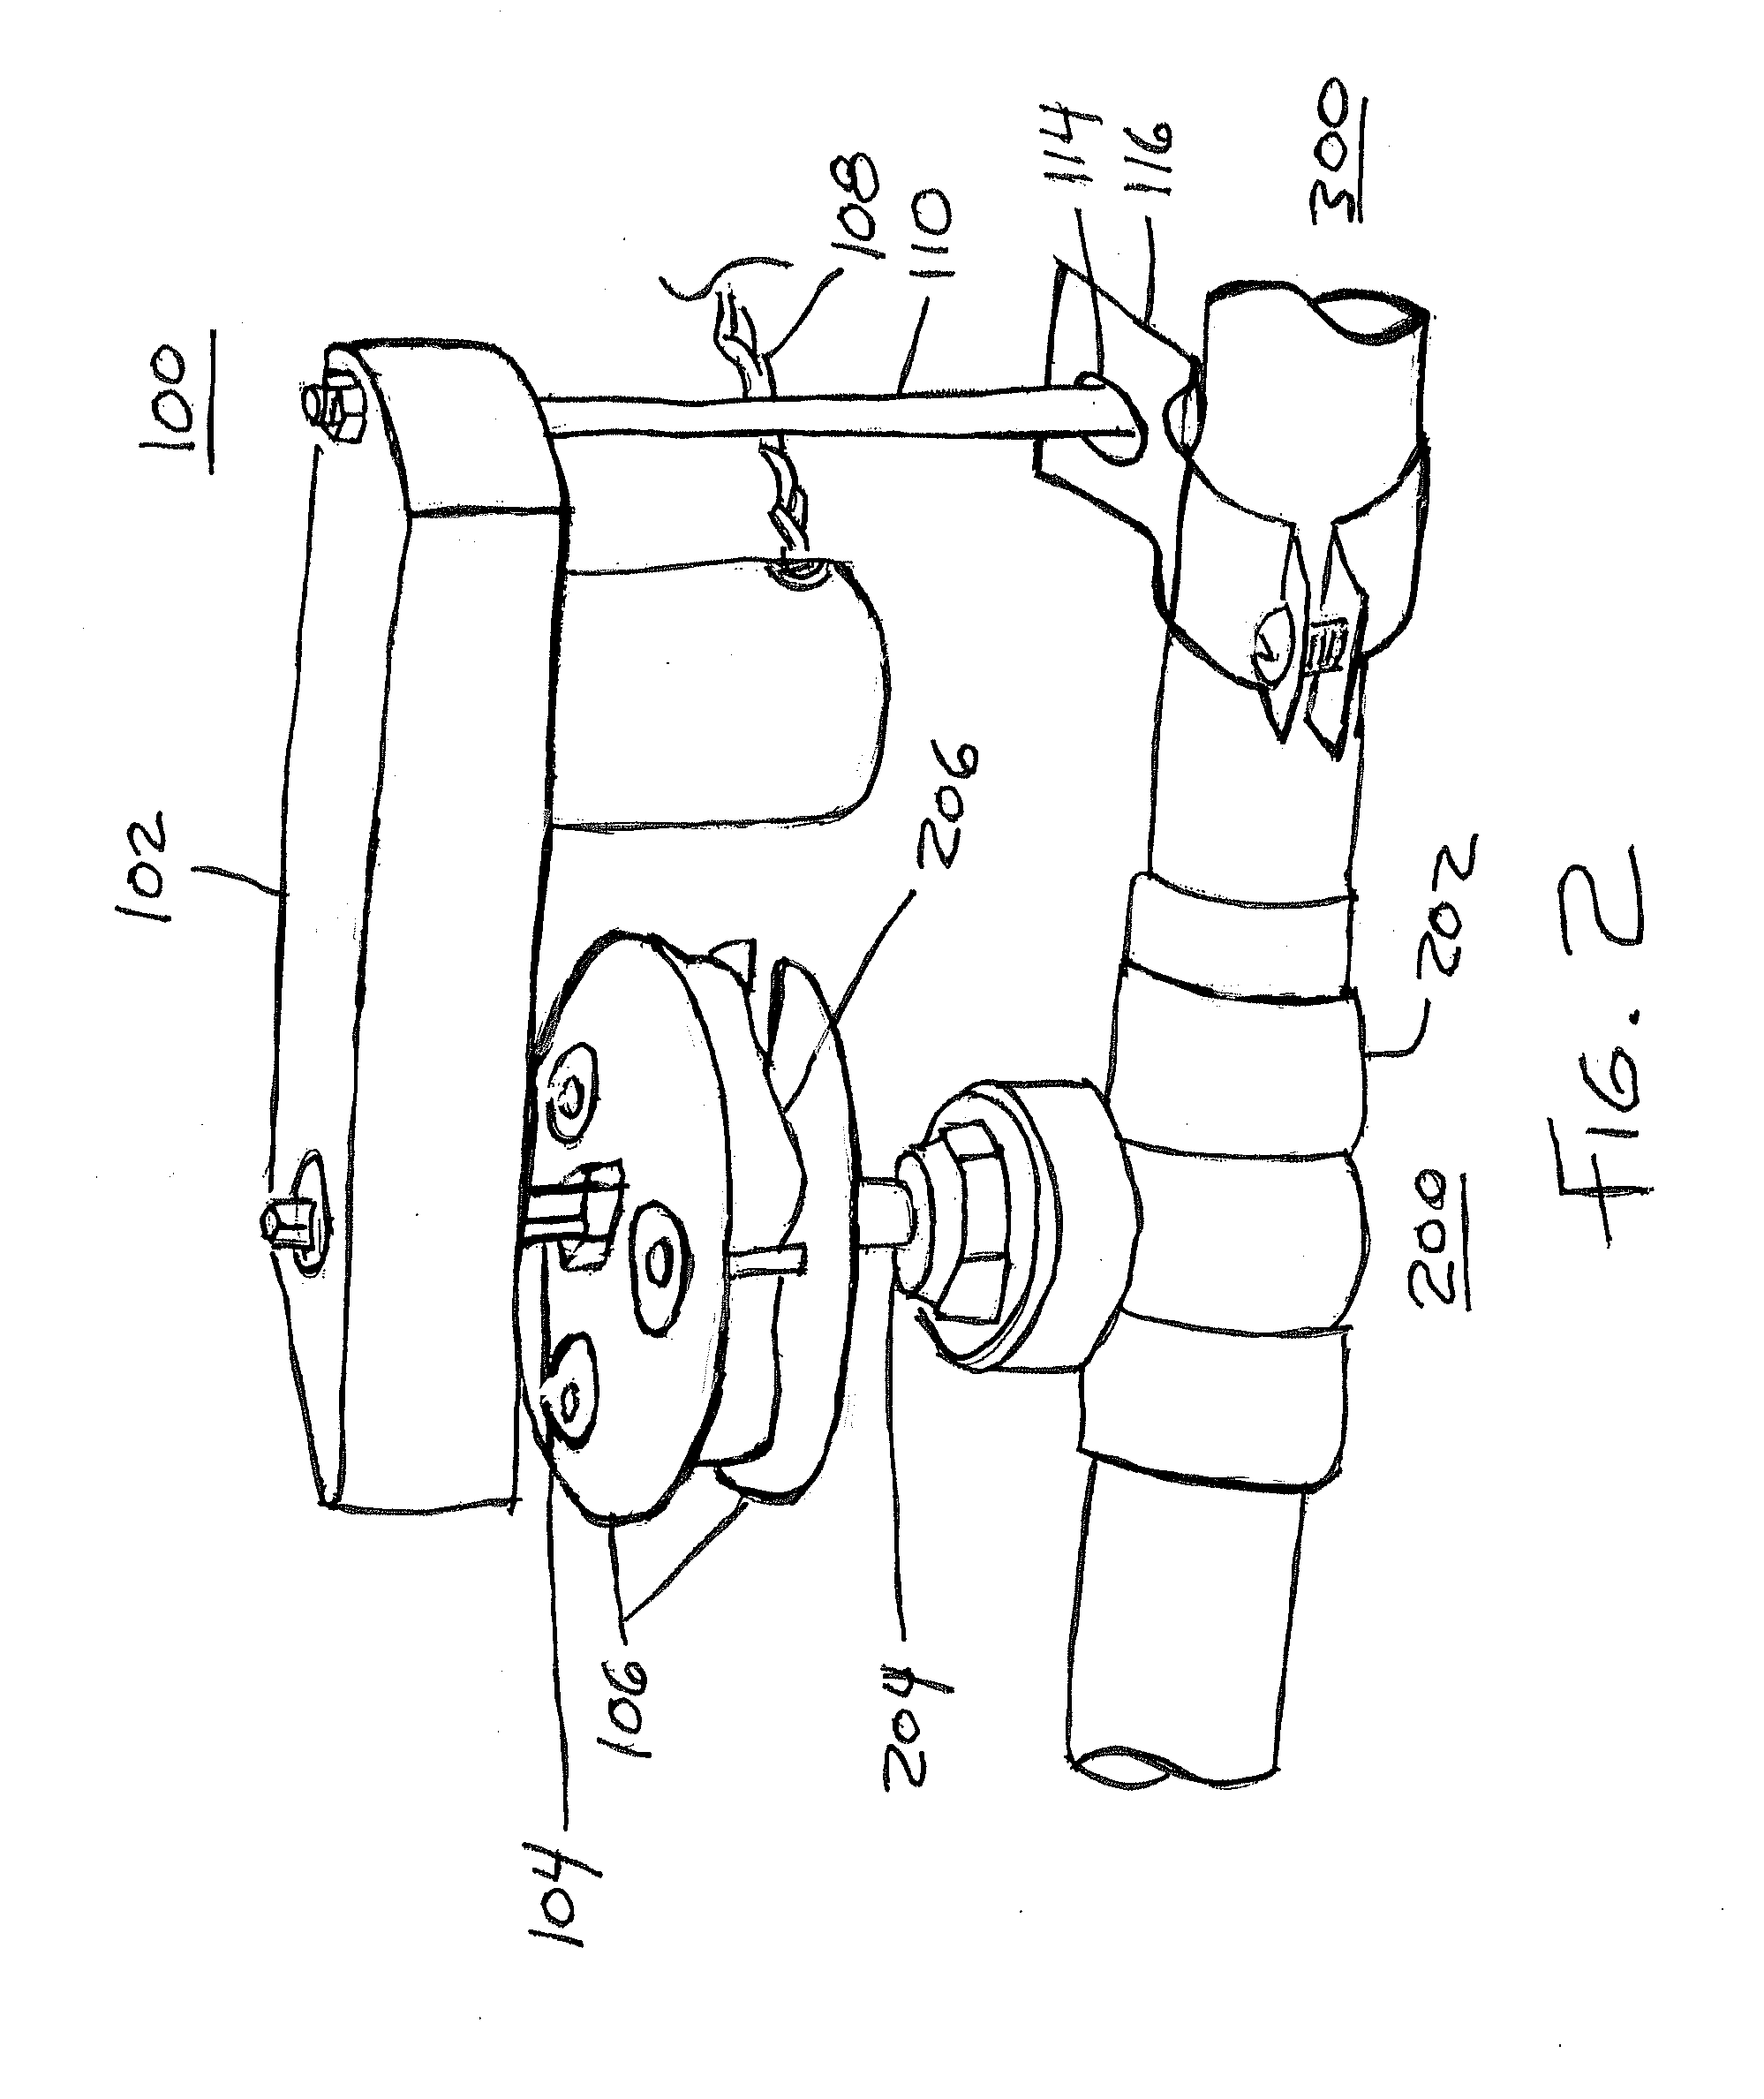 Efficient manual to automatic valve conversion device